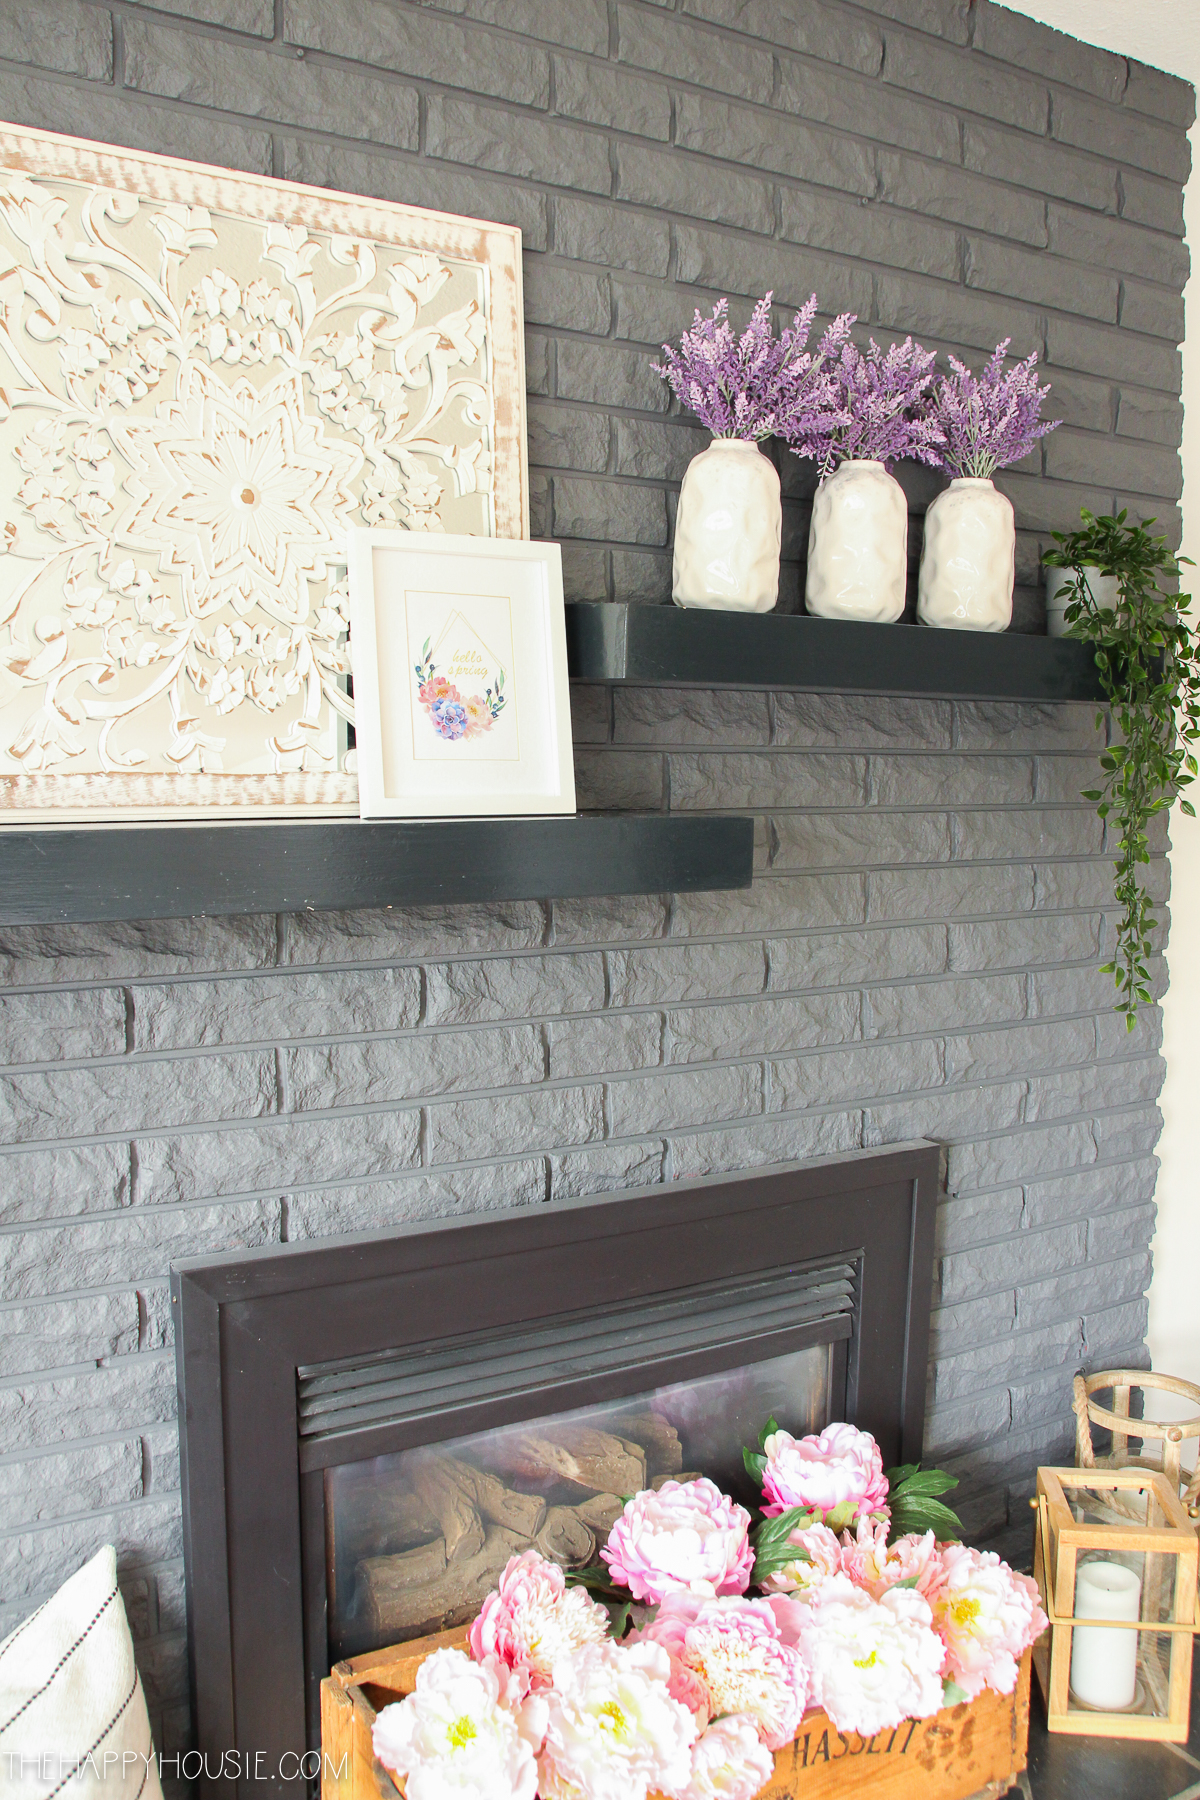 Decorative candles beside the peonies on the fireplace mantel.